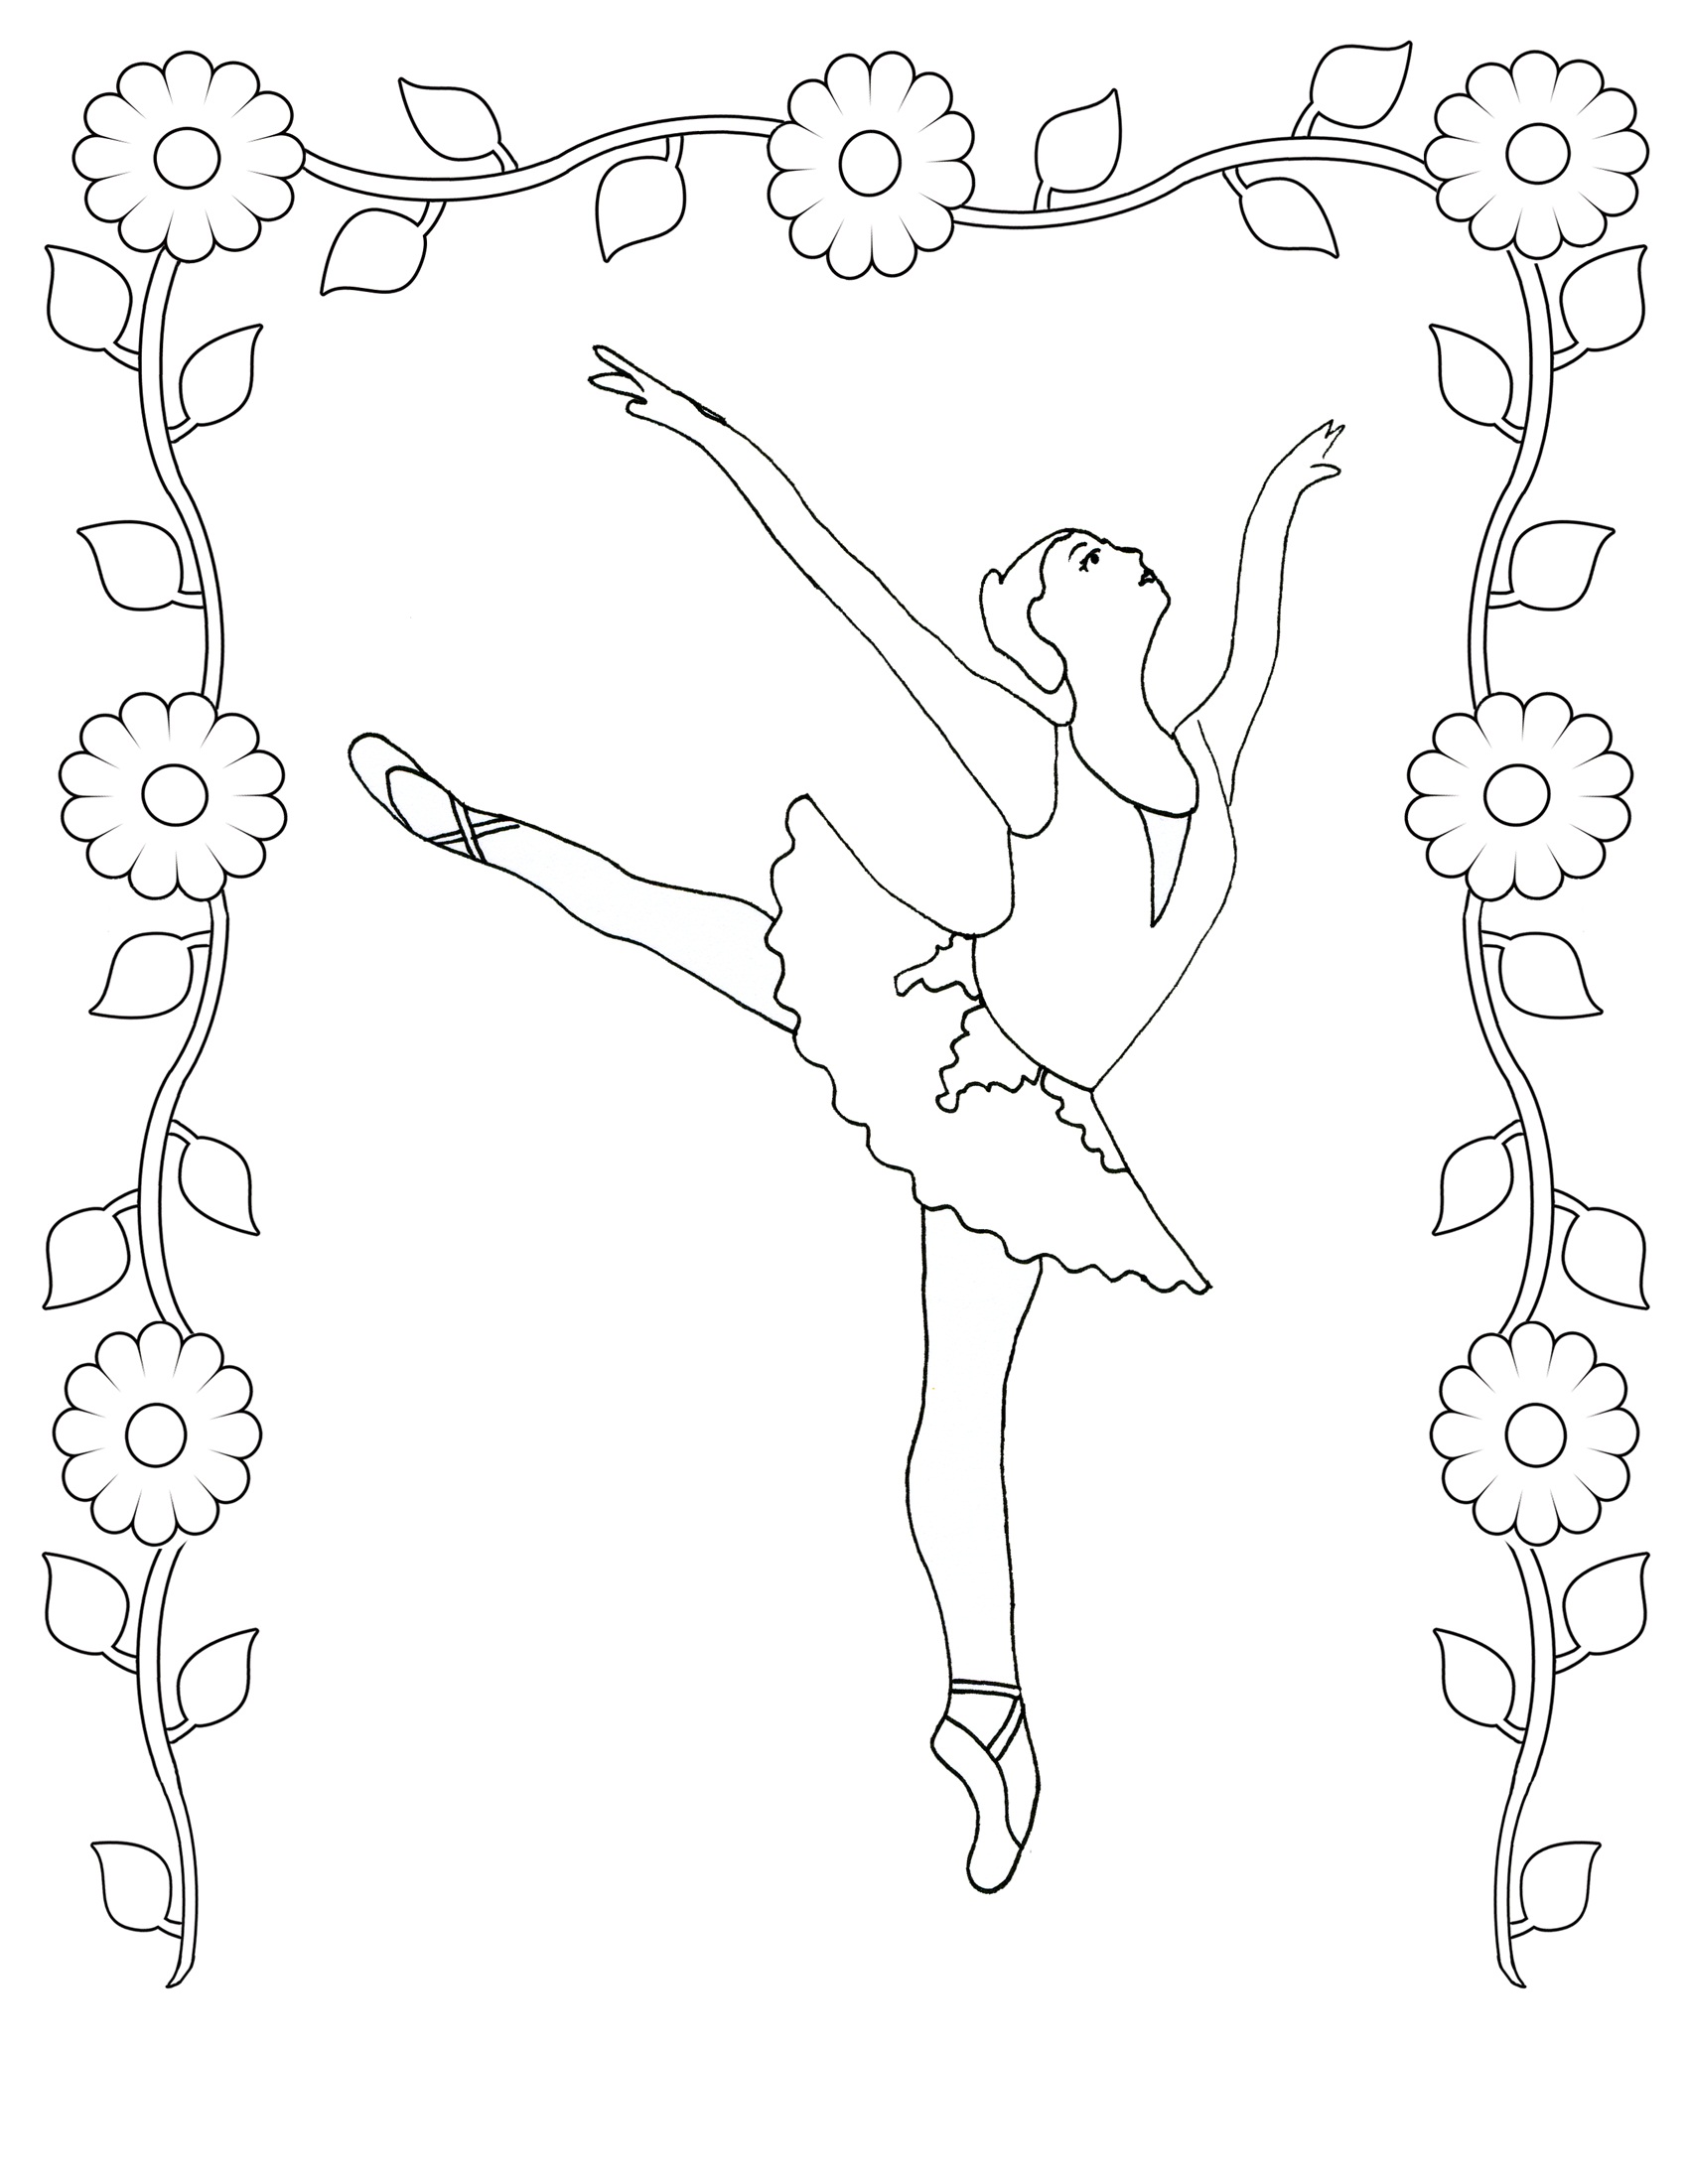 Free Printable Ballet Coloring Pages For Kids BEDECOR Free Coloring Picture wallpaper give a chance to color on the wall without getting in trouble! Fill the walls of your home or office with stress-relieving [bedroomdecorz.blogspot.com]